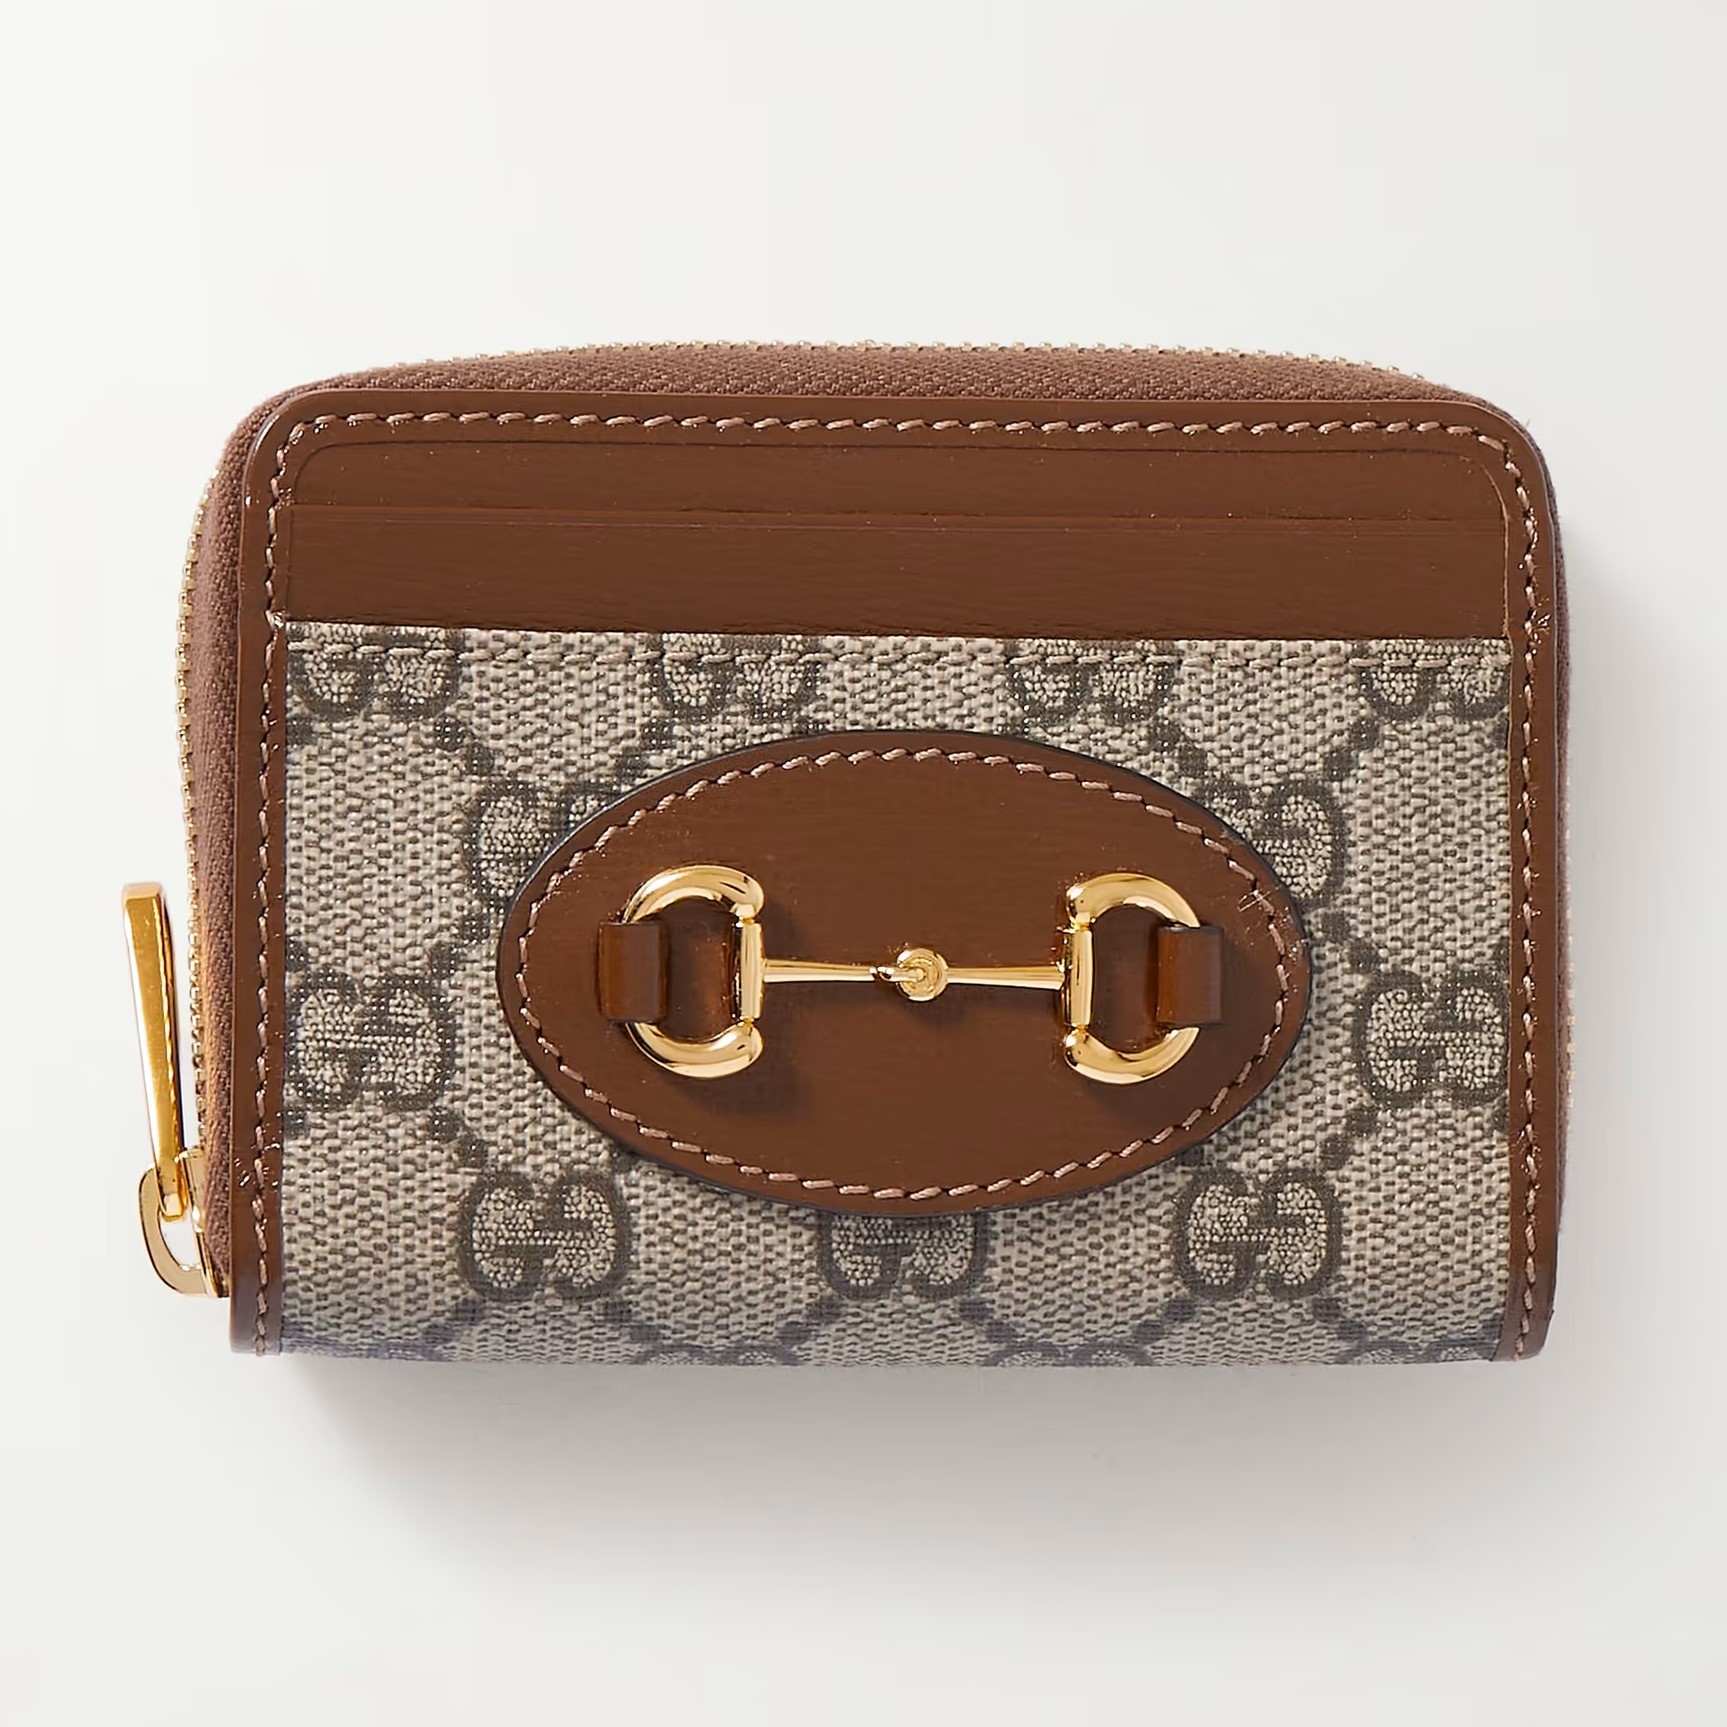 VÍ NGẮN NỮ CẦM TAY GUCCI HORSEBIT 1955 SMALL BROWN LEATHER TRIMMED PRINTED COATED CANVAS CARDHOLDER 2